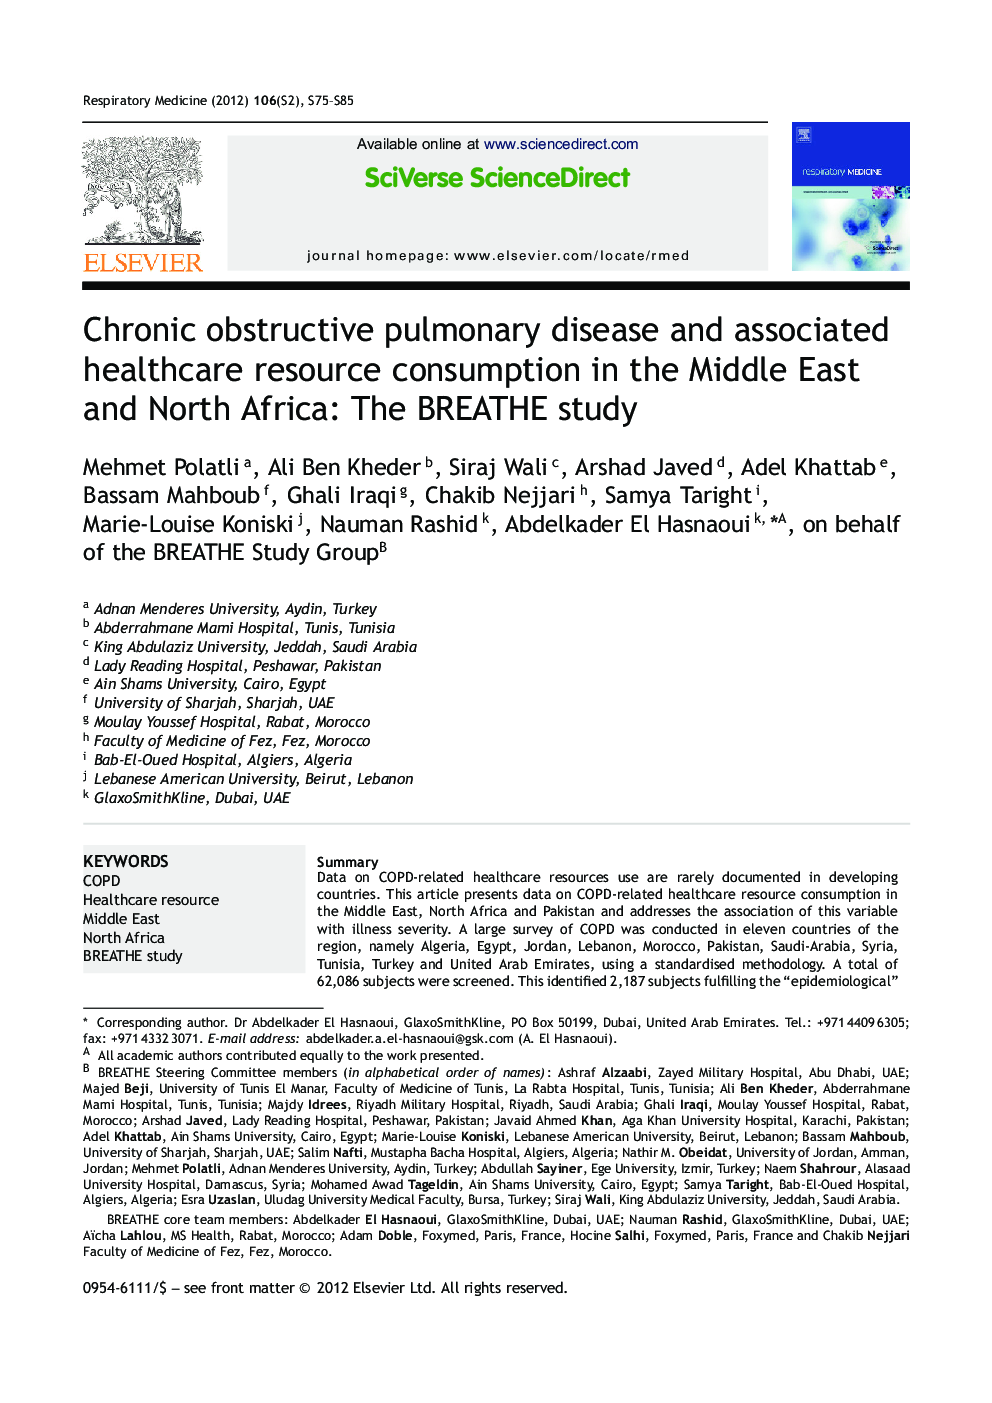 Chronic obstructive pulmonary disease and associated healthcare resource consumption in the Middle East and North Africa: The BREATHE study 